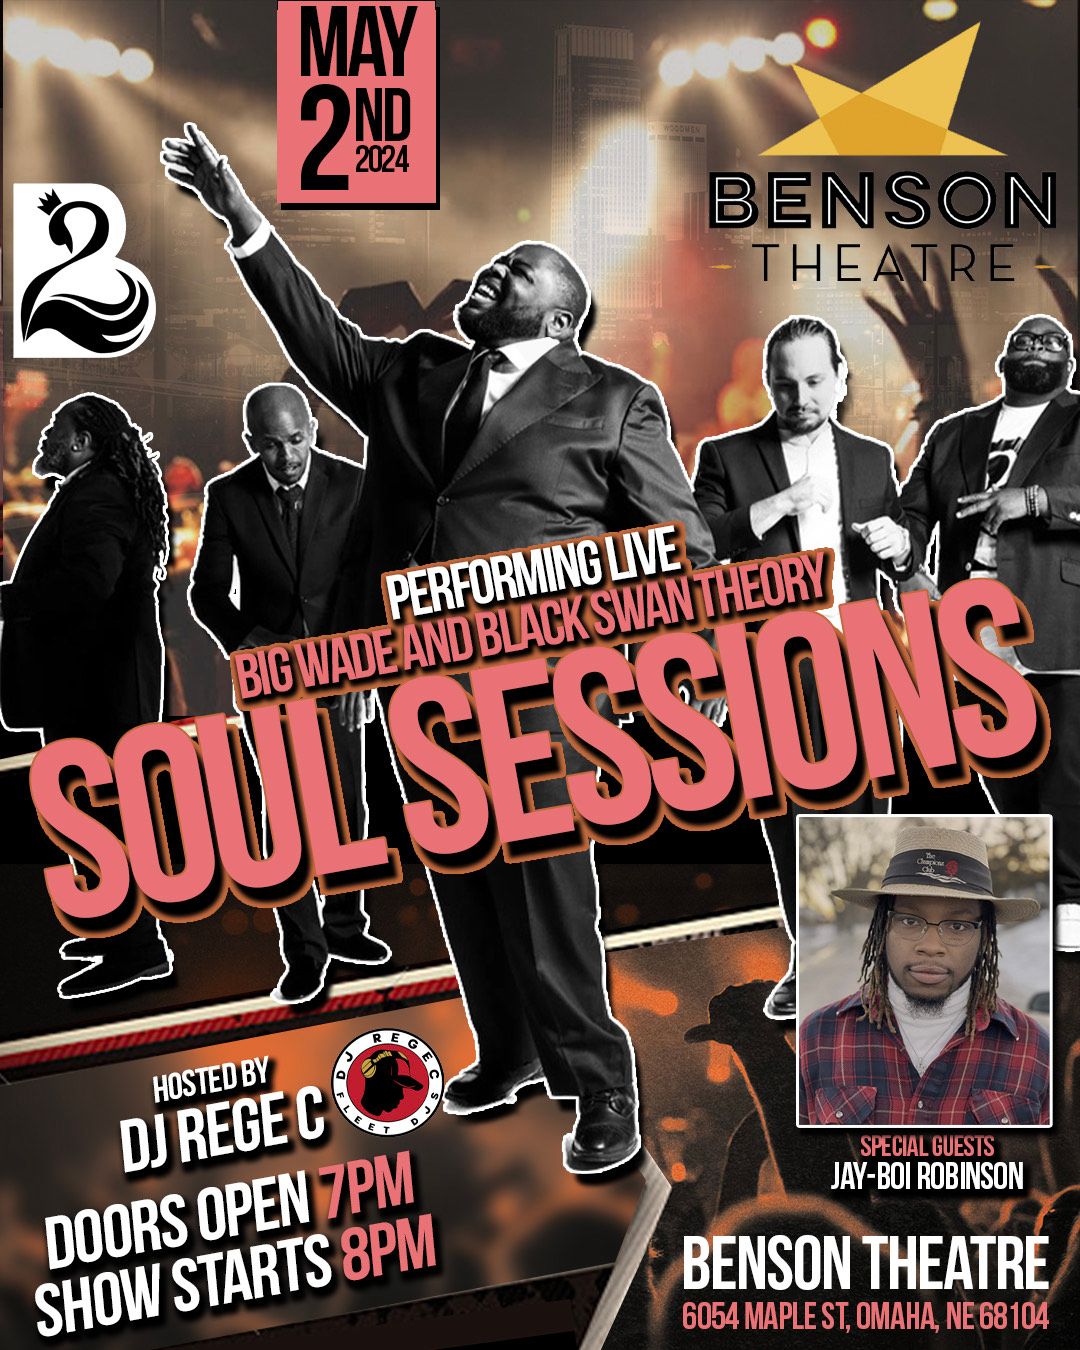 Soul Sessions featuring Big Wade and Black Swan Theory and Jay-Boi Robinson!! Hosted by DJ REGE C